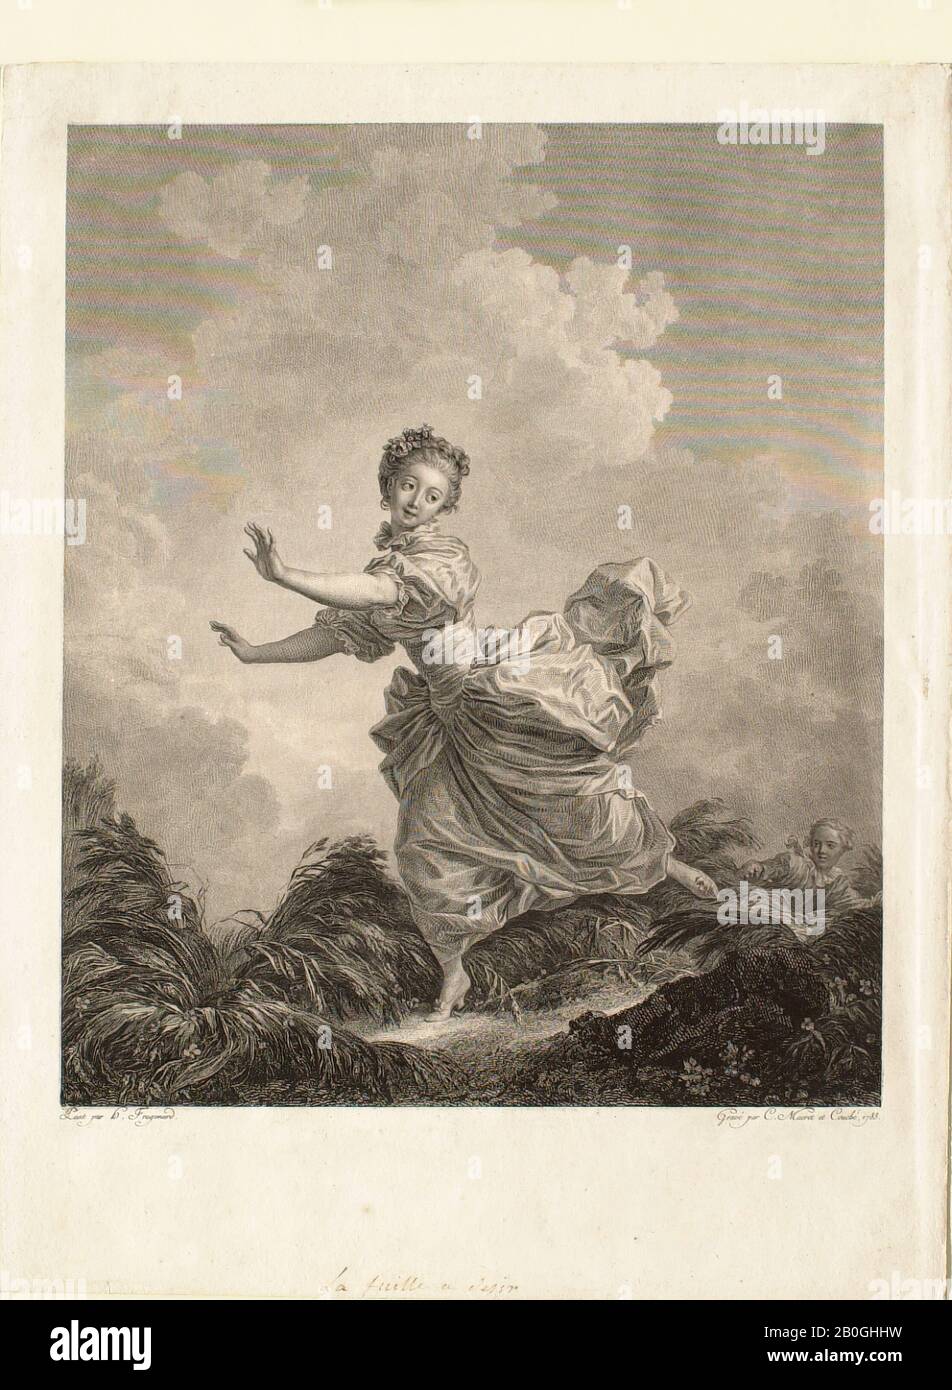 Jacques Couché, French, 1759–after 1808, After Jean-Honoré Fragonard, (French, 1732–1806), La fuite à dessein, 1783, Etching and engraving on laid paper, image: 11 5/8 x 9 11/16 in. (29.5 x 24.6 cm Stock Photo